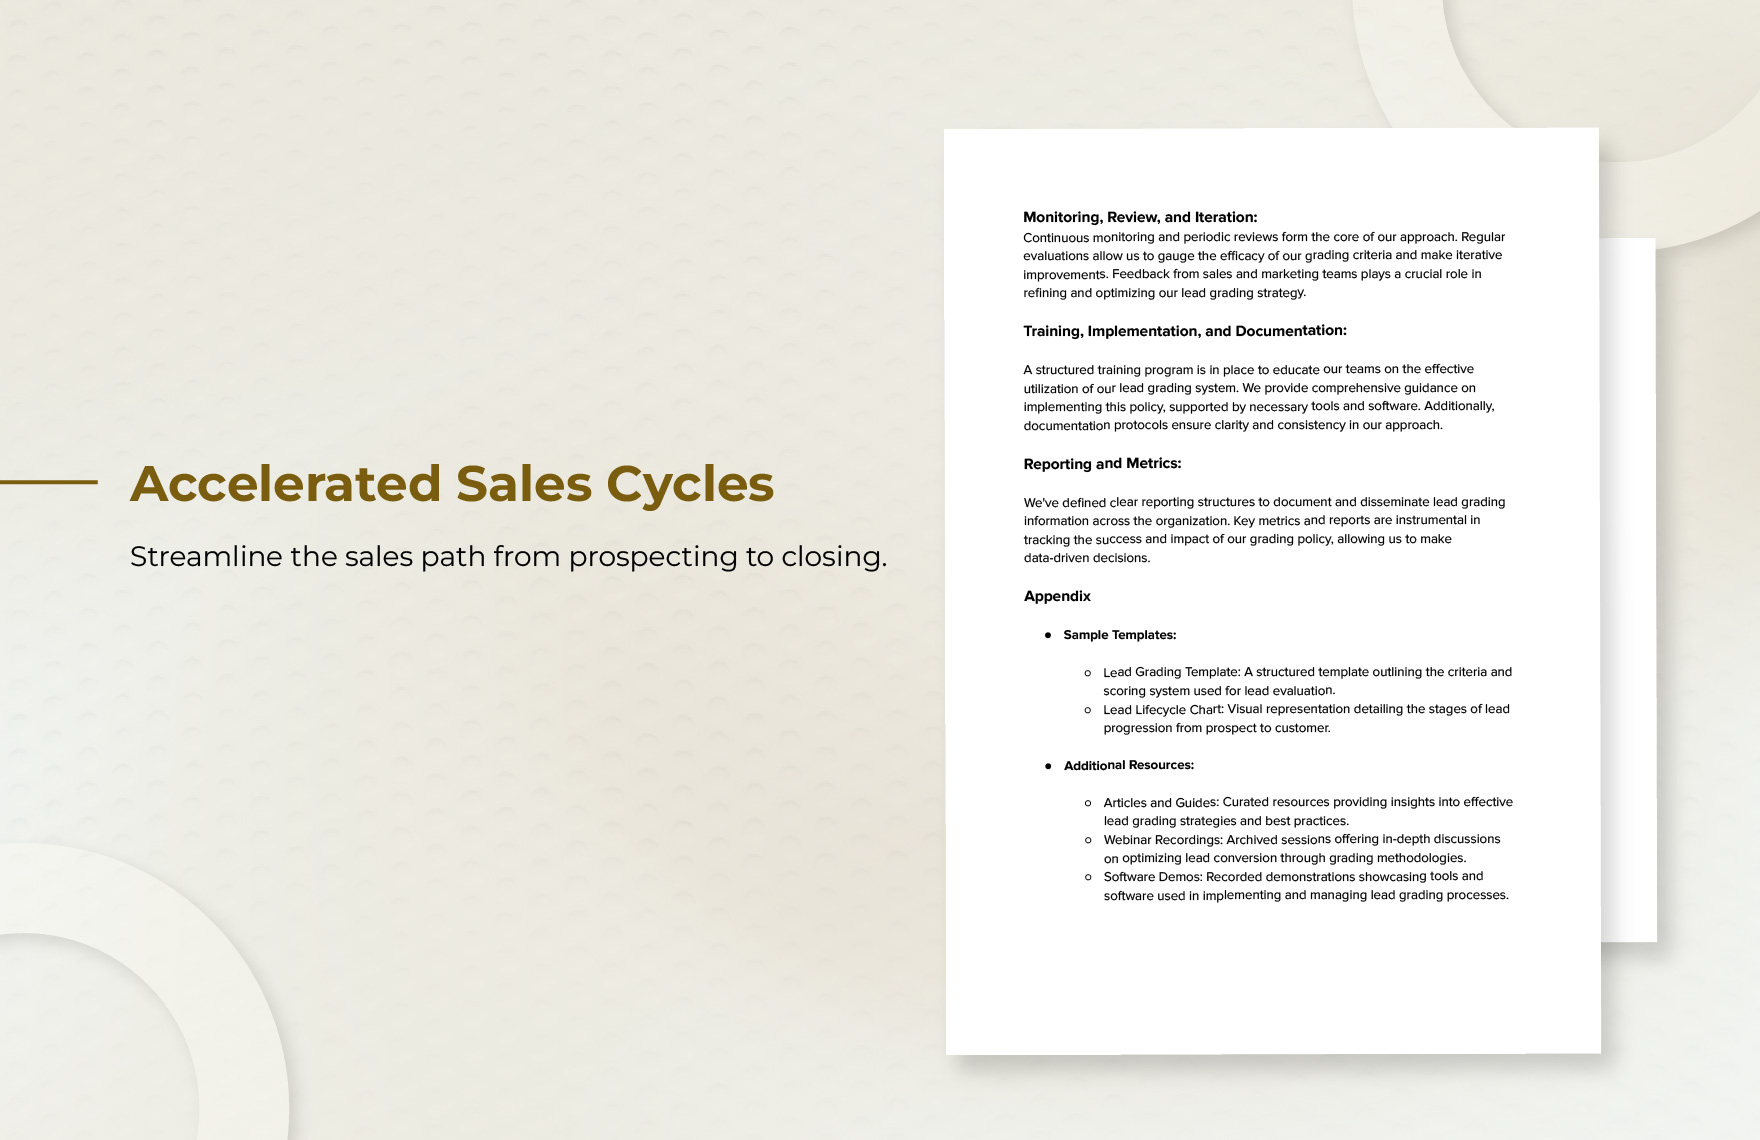 Sales Lead Grading Policy Template